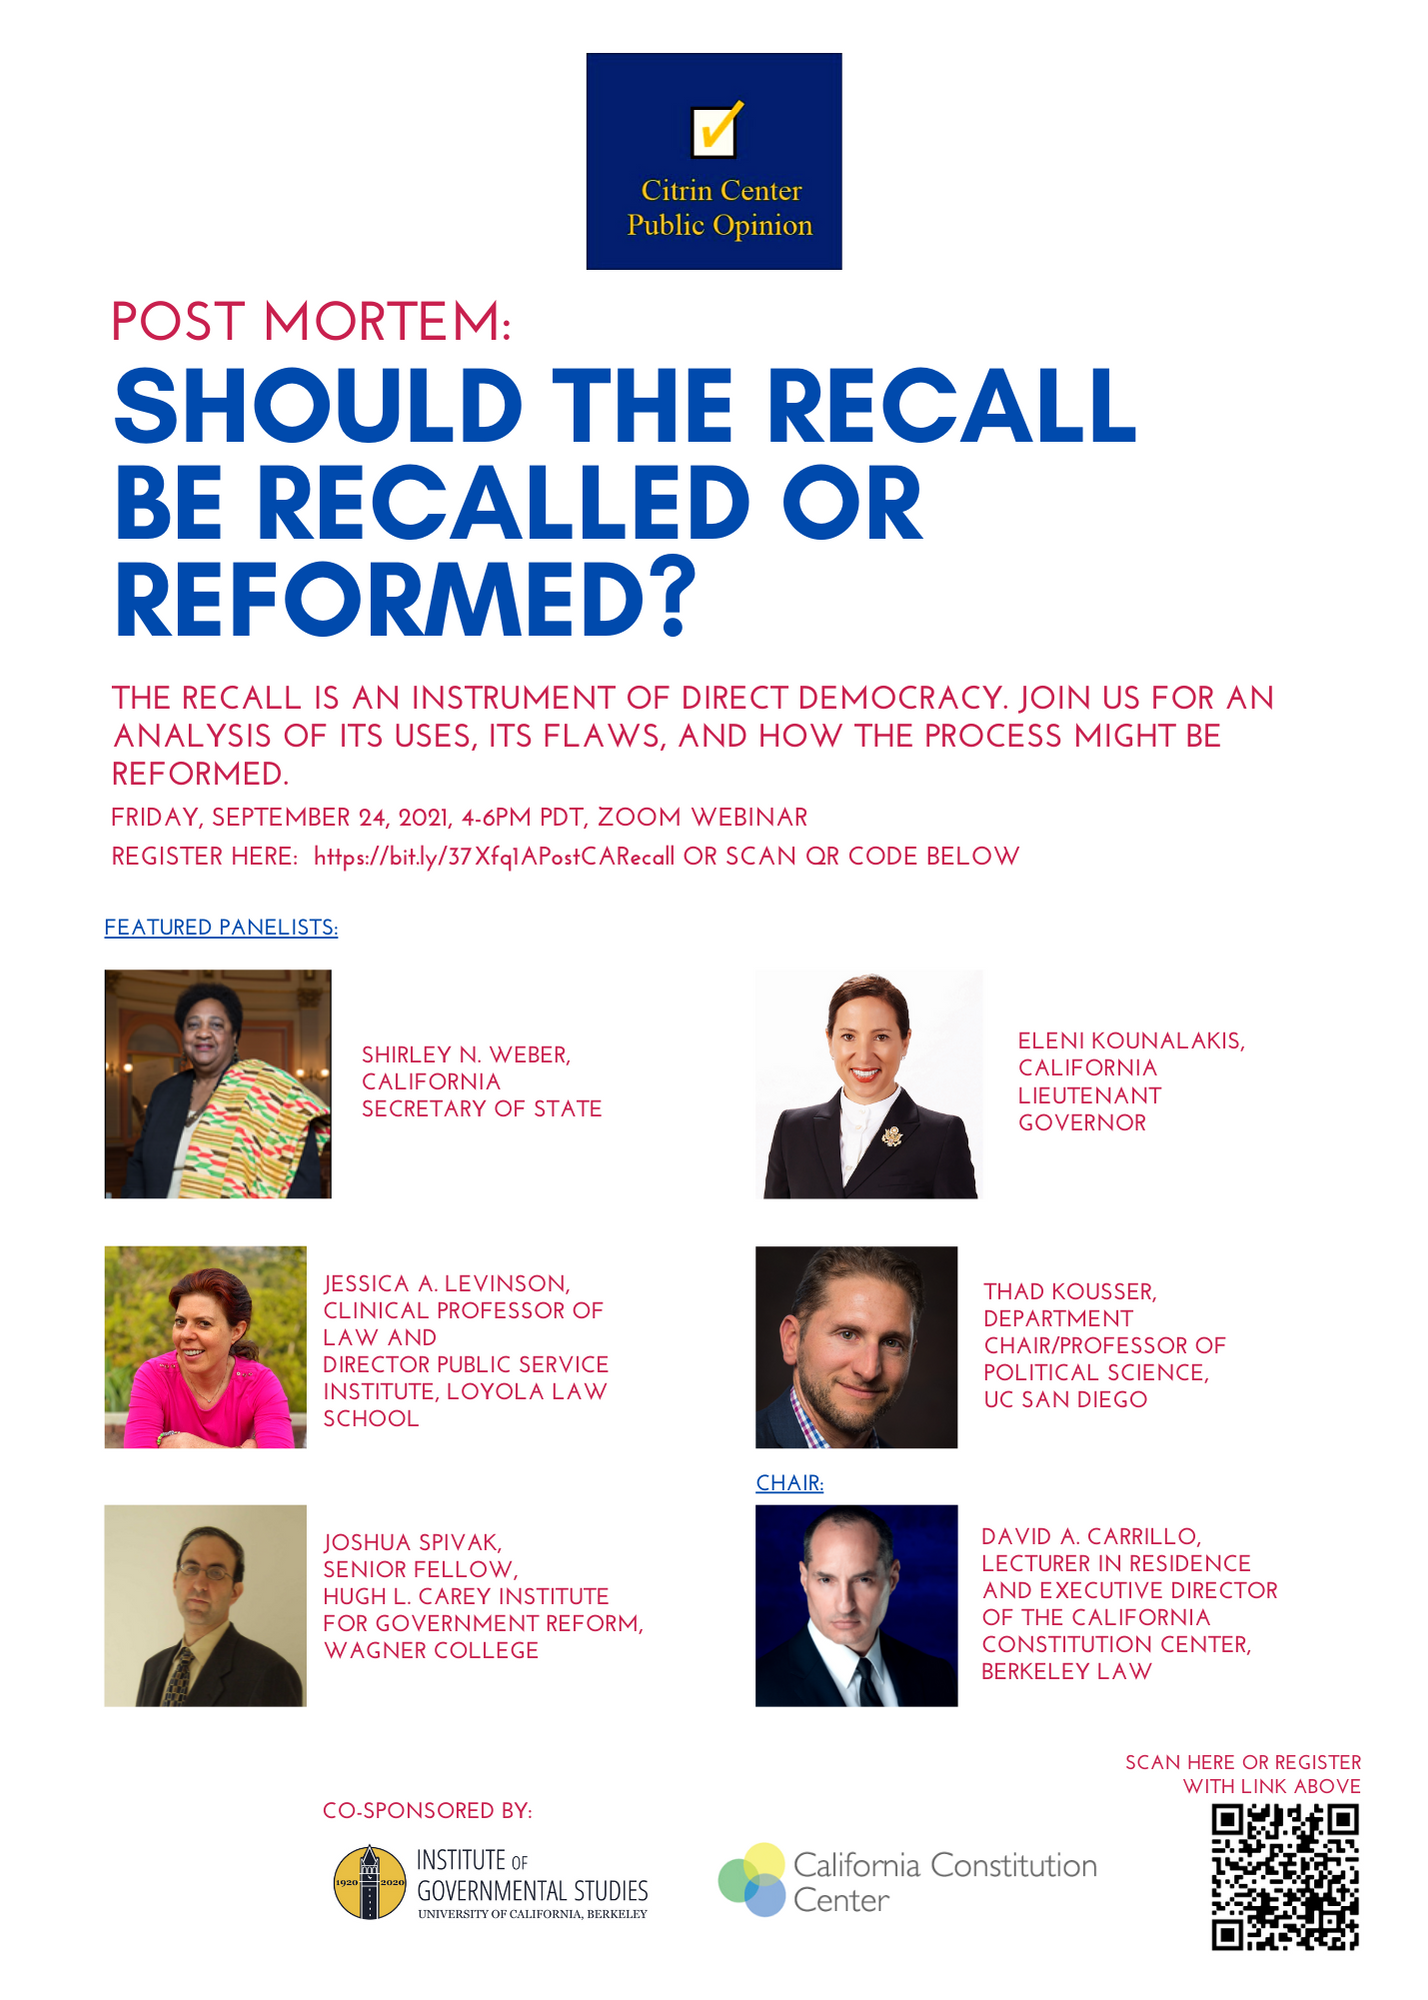 Event flyer for "Post-Mortem: Should the Recall be Recalled or Reformed?"